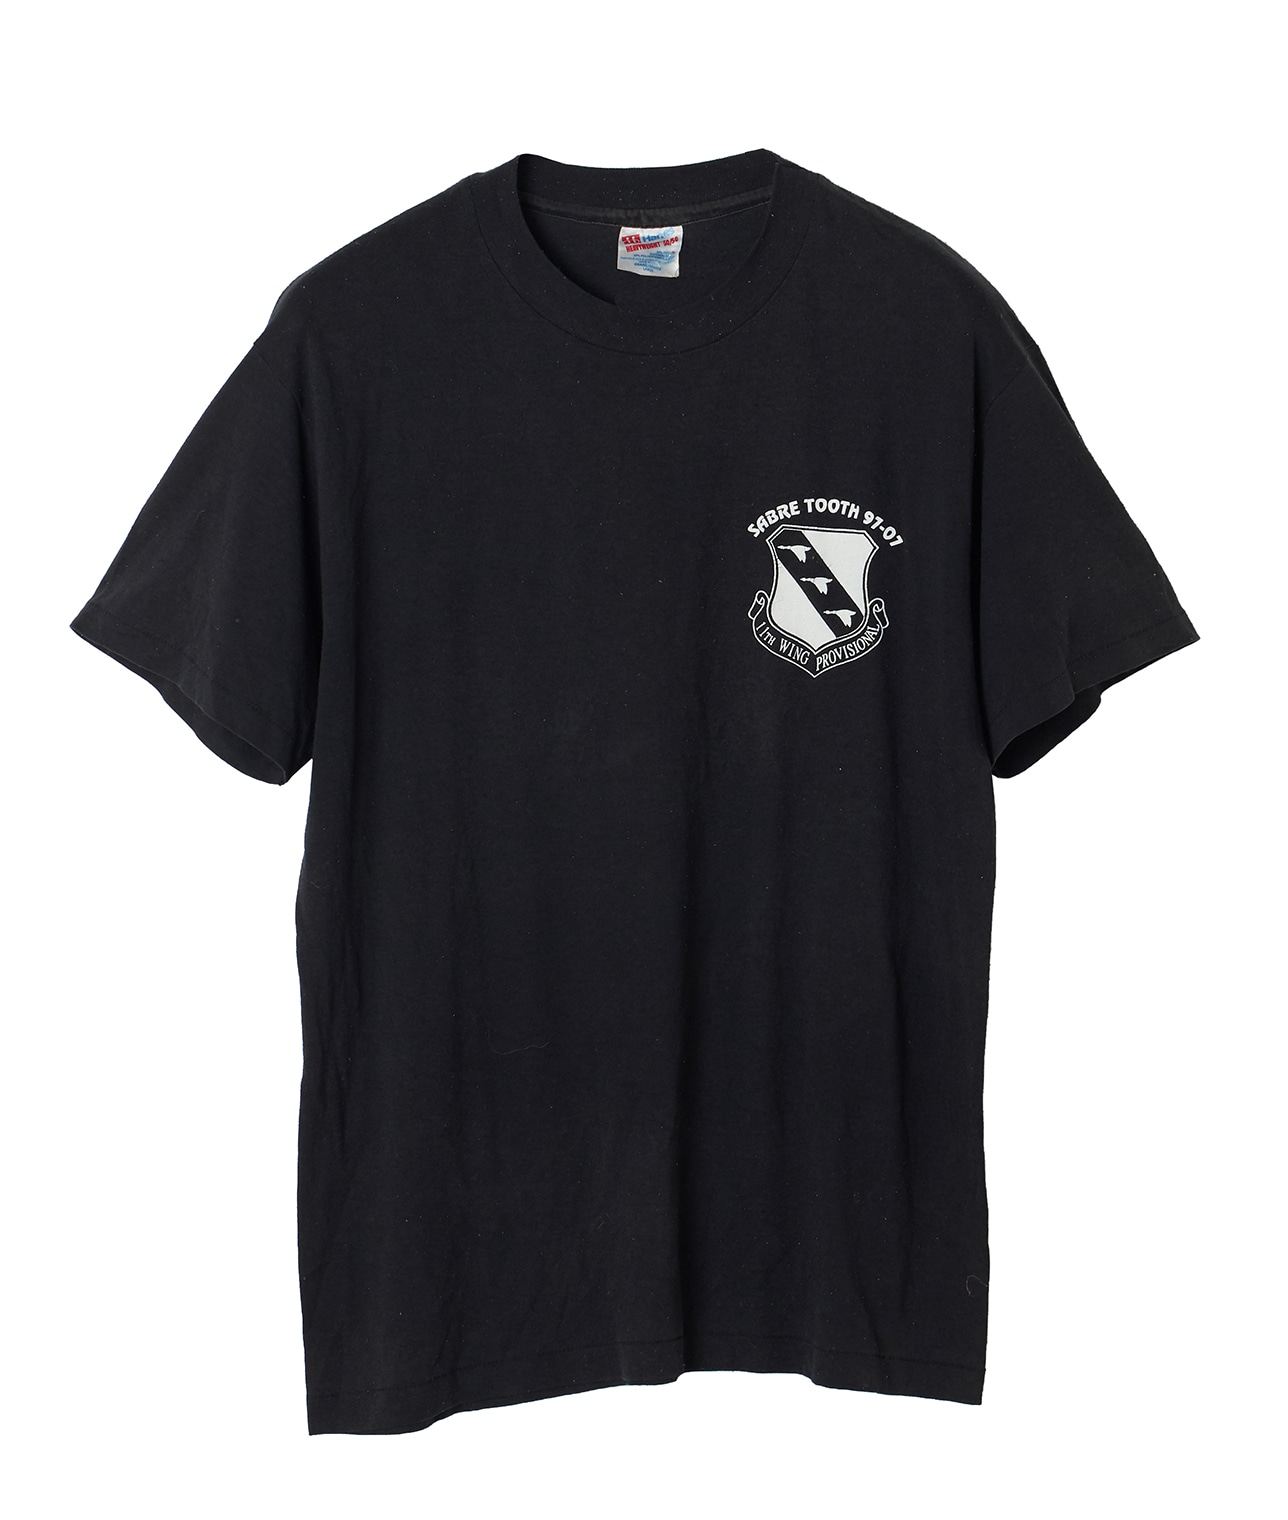 USED/SABRE TOOTH 97-07プリントTシャツ 詳細画像 ブラック 1